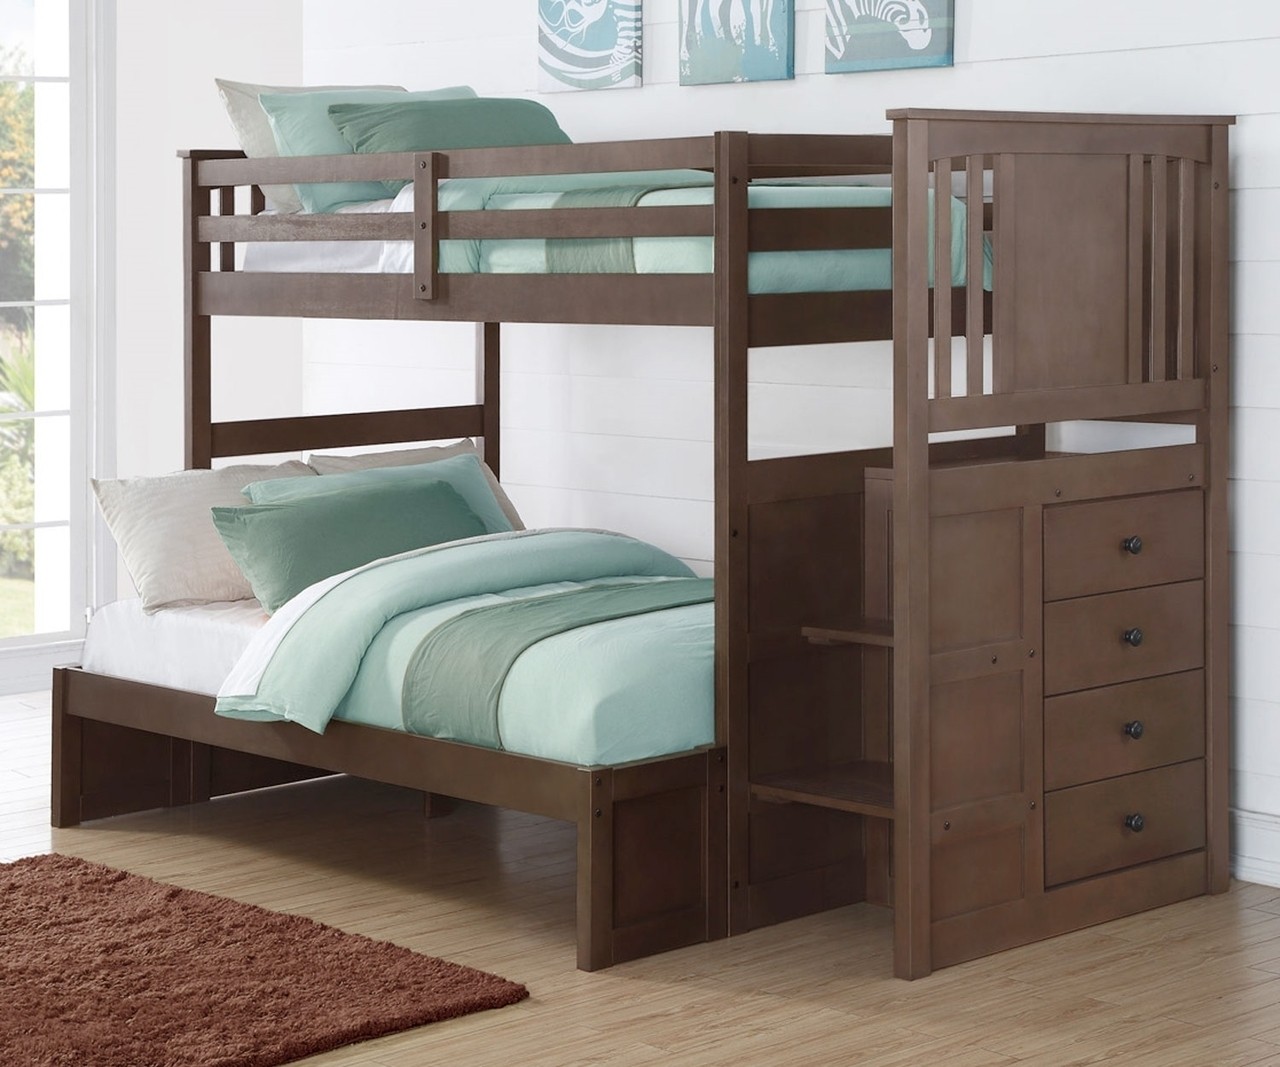 Donco trading princeton twin over full stairway bunk bed